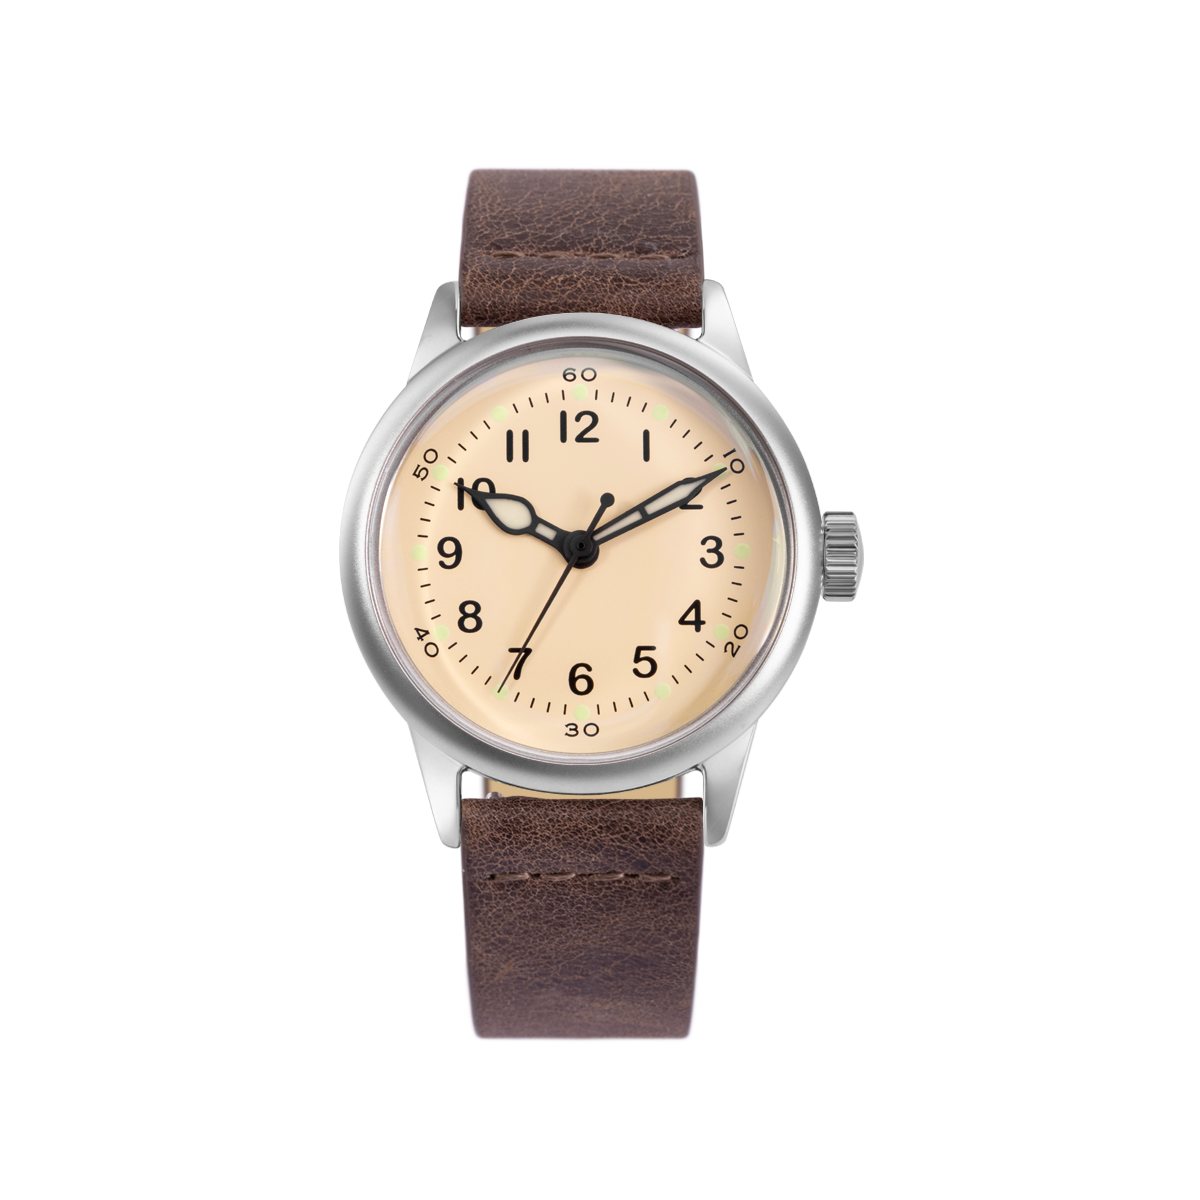 Service Watch - White Leather